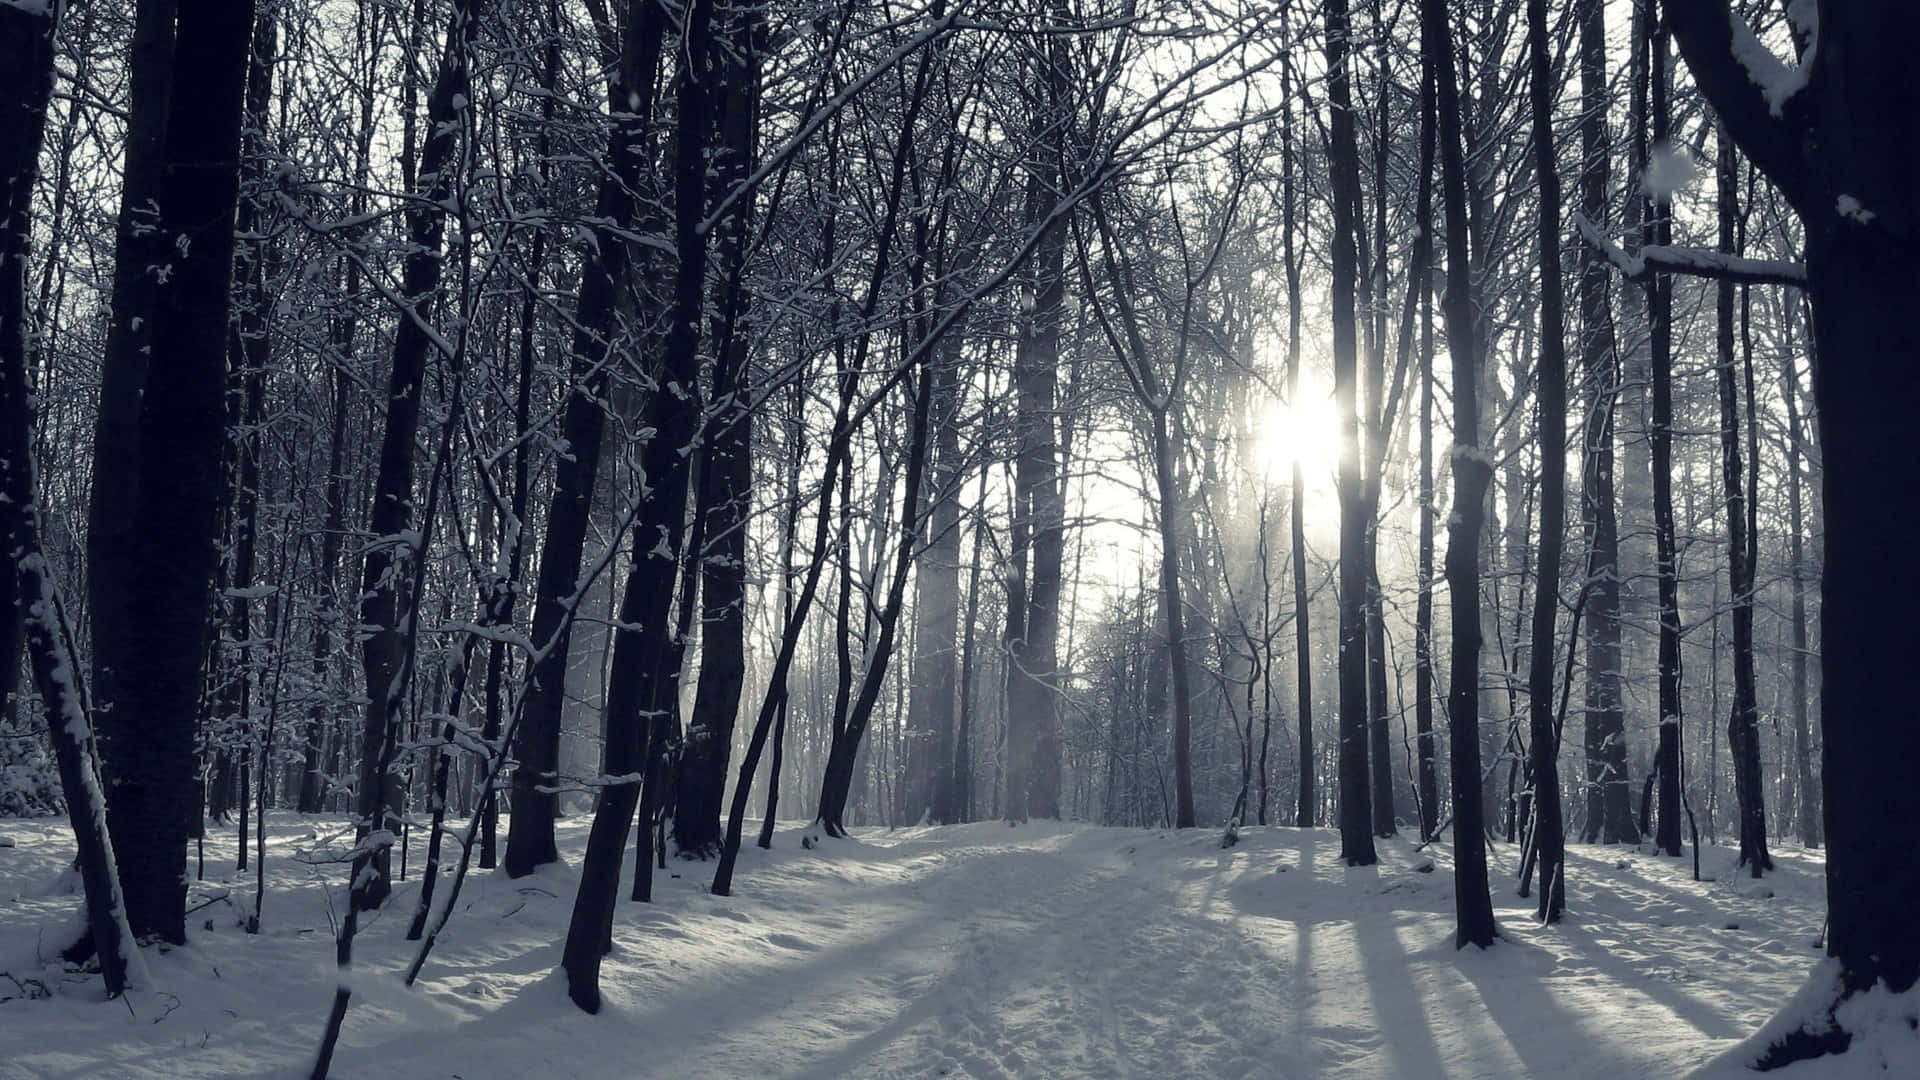 A Snow Covered Path In A Forest With Sunlight Shining Through The Trees